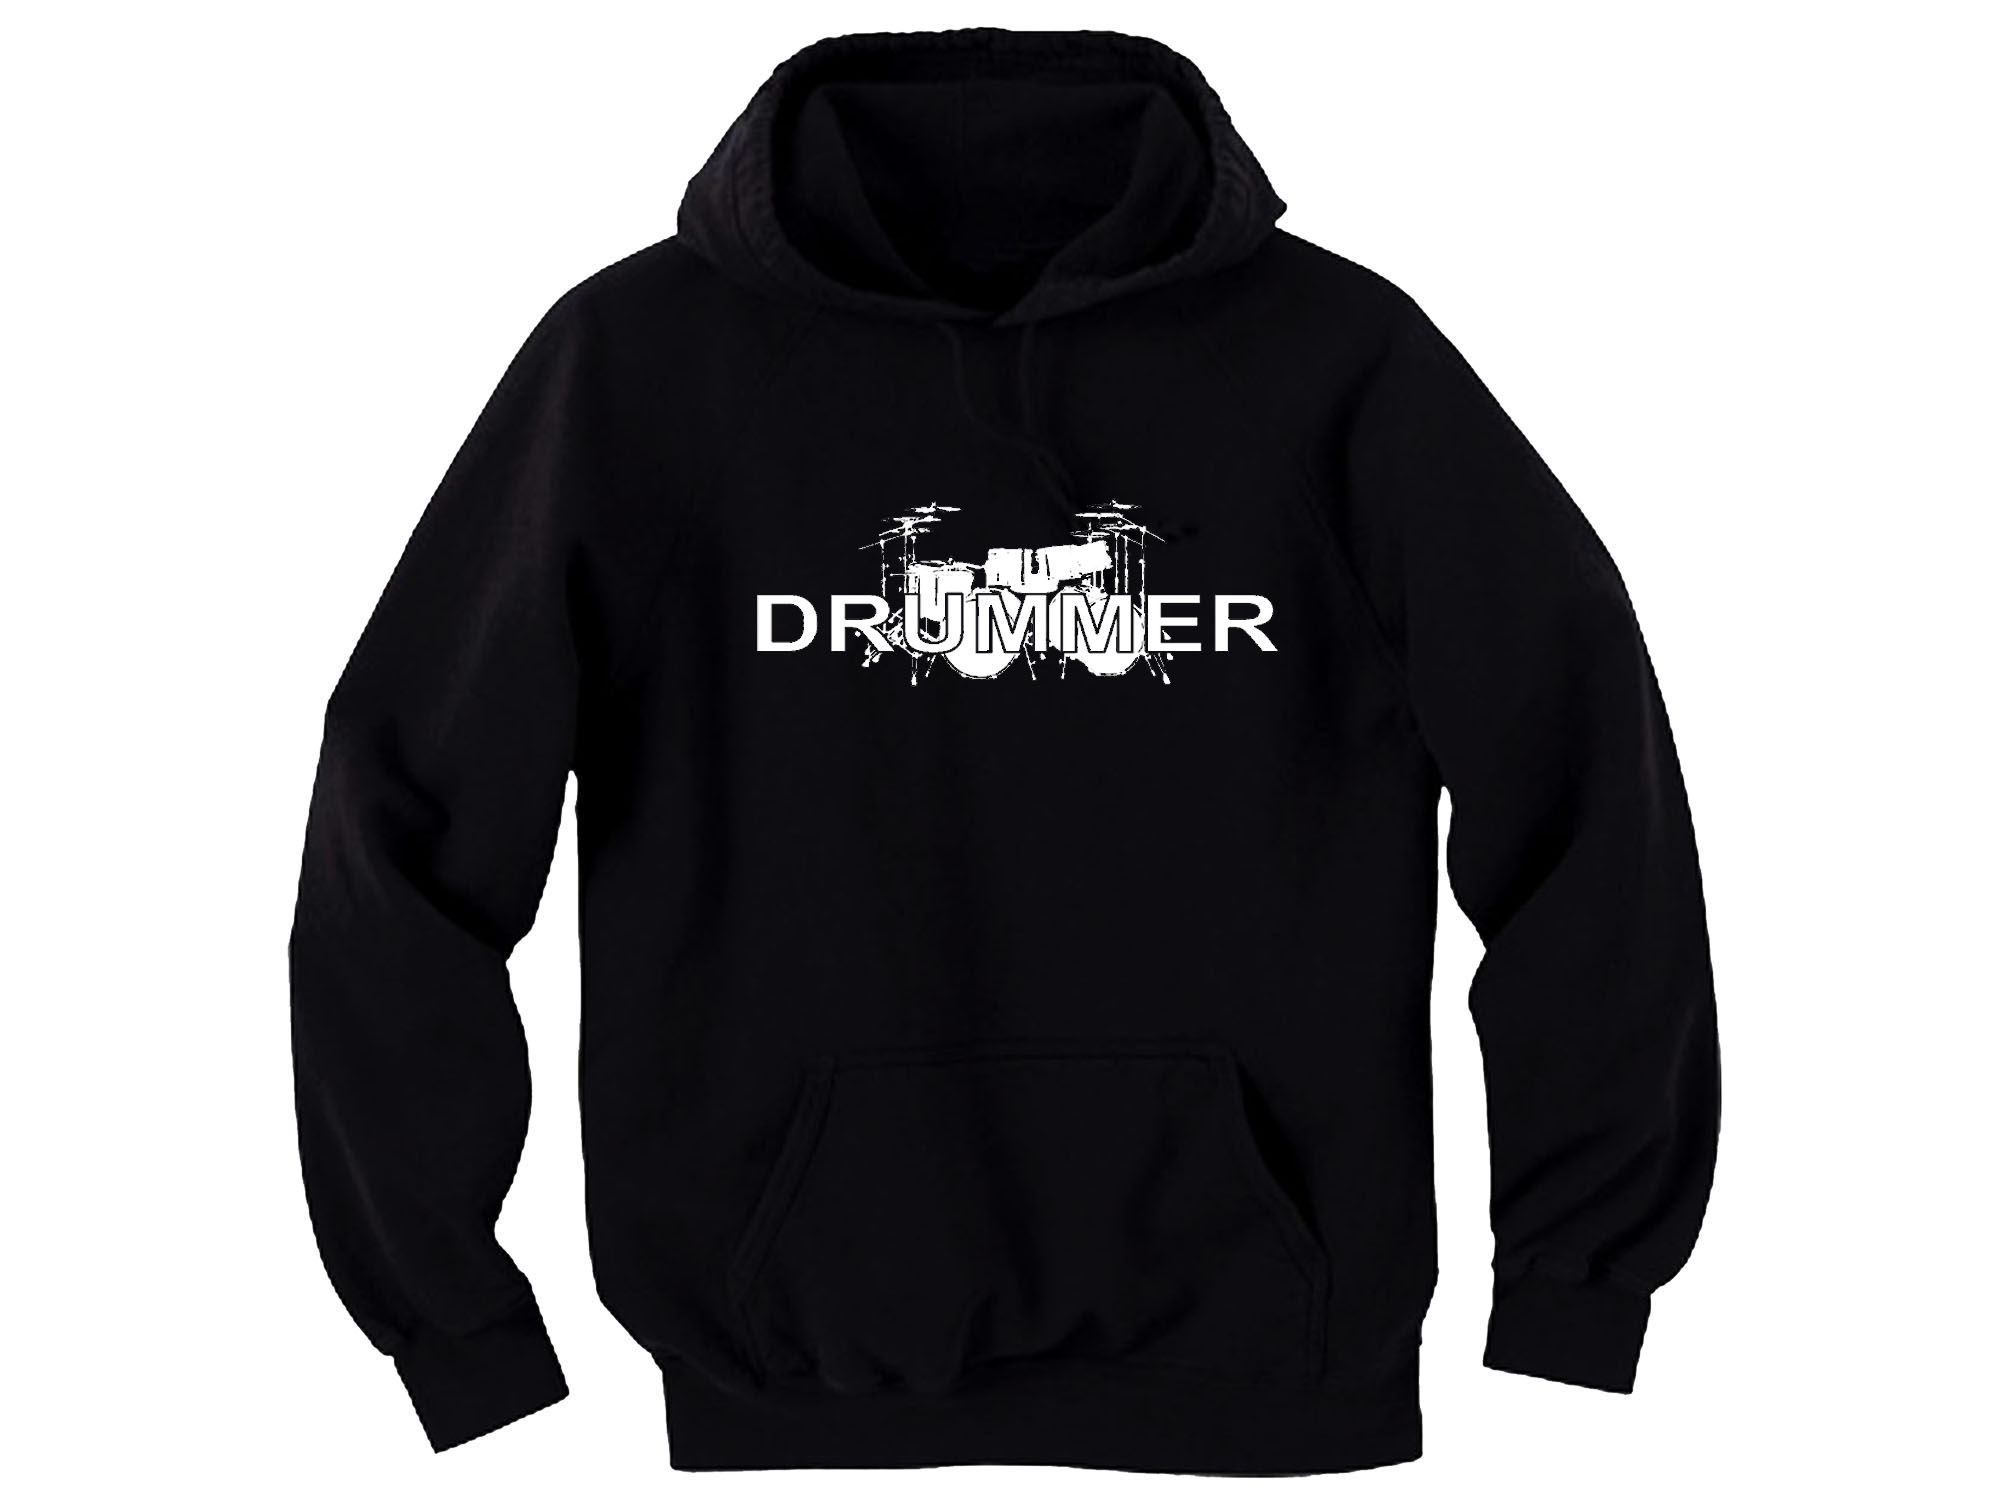 Drummer drums player Musician graphic hoodie